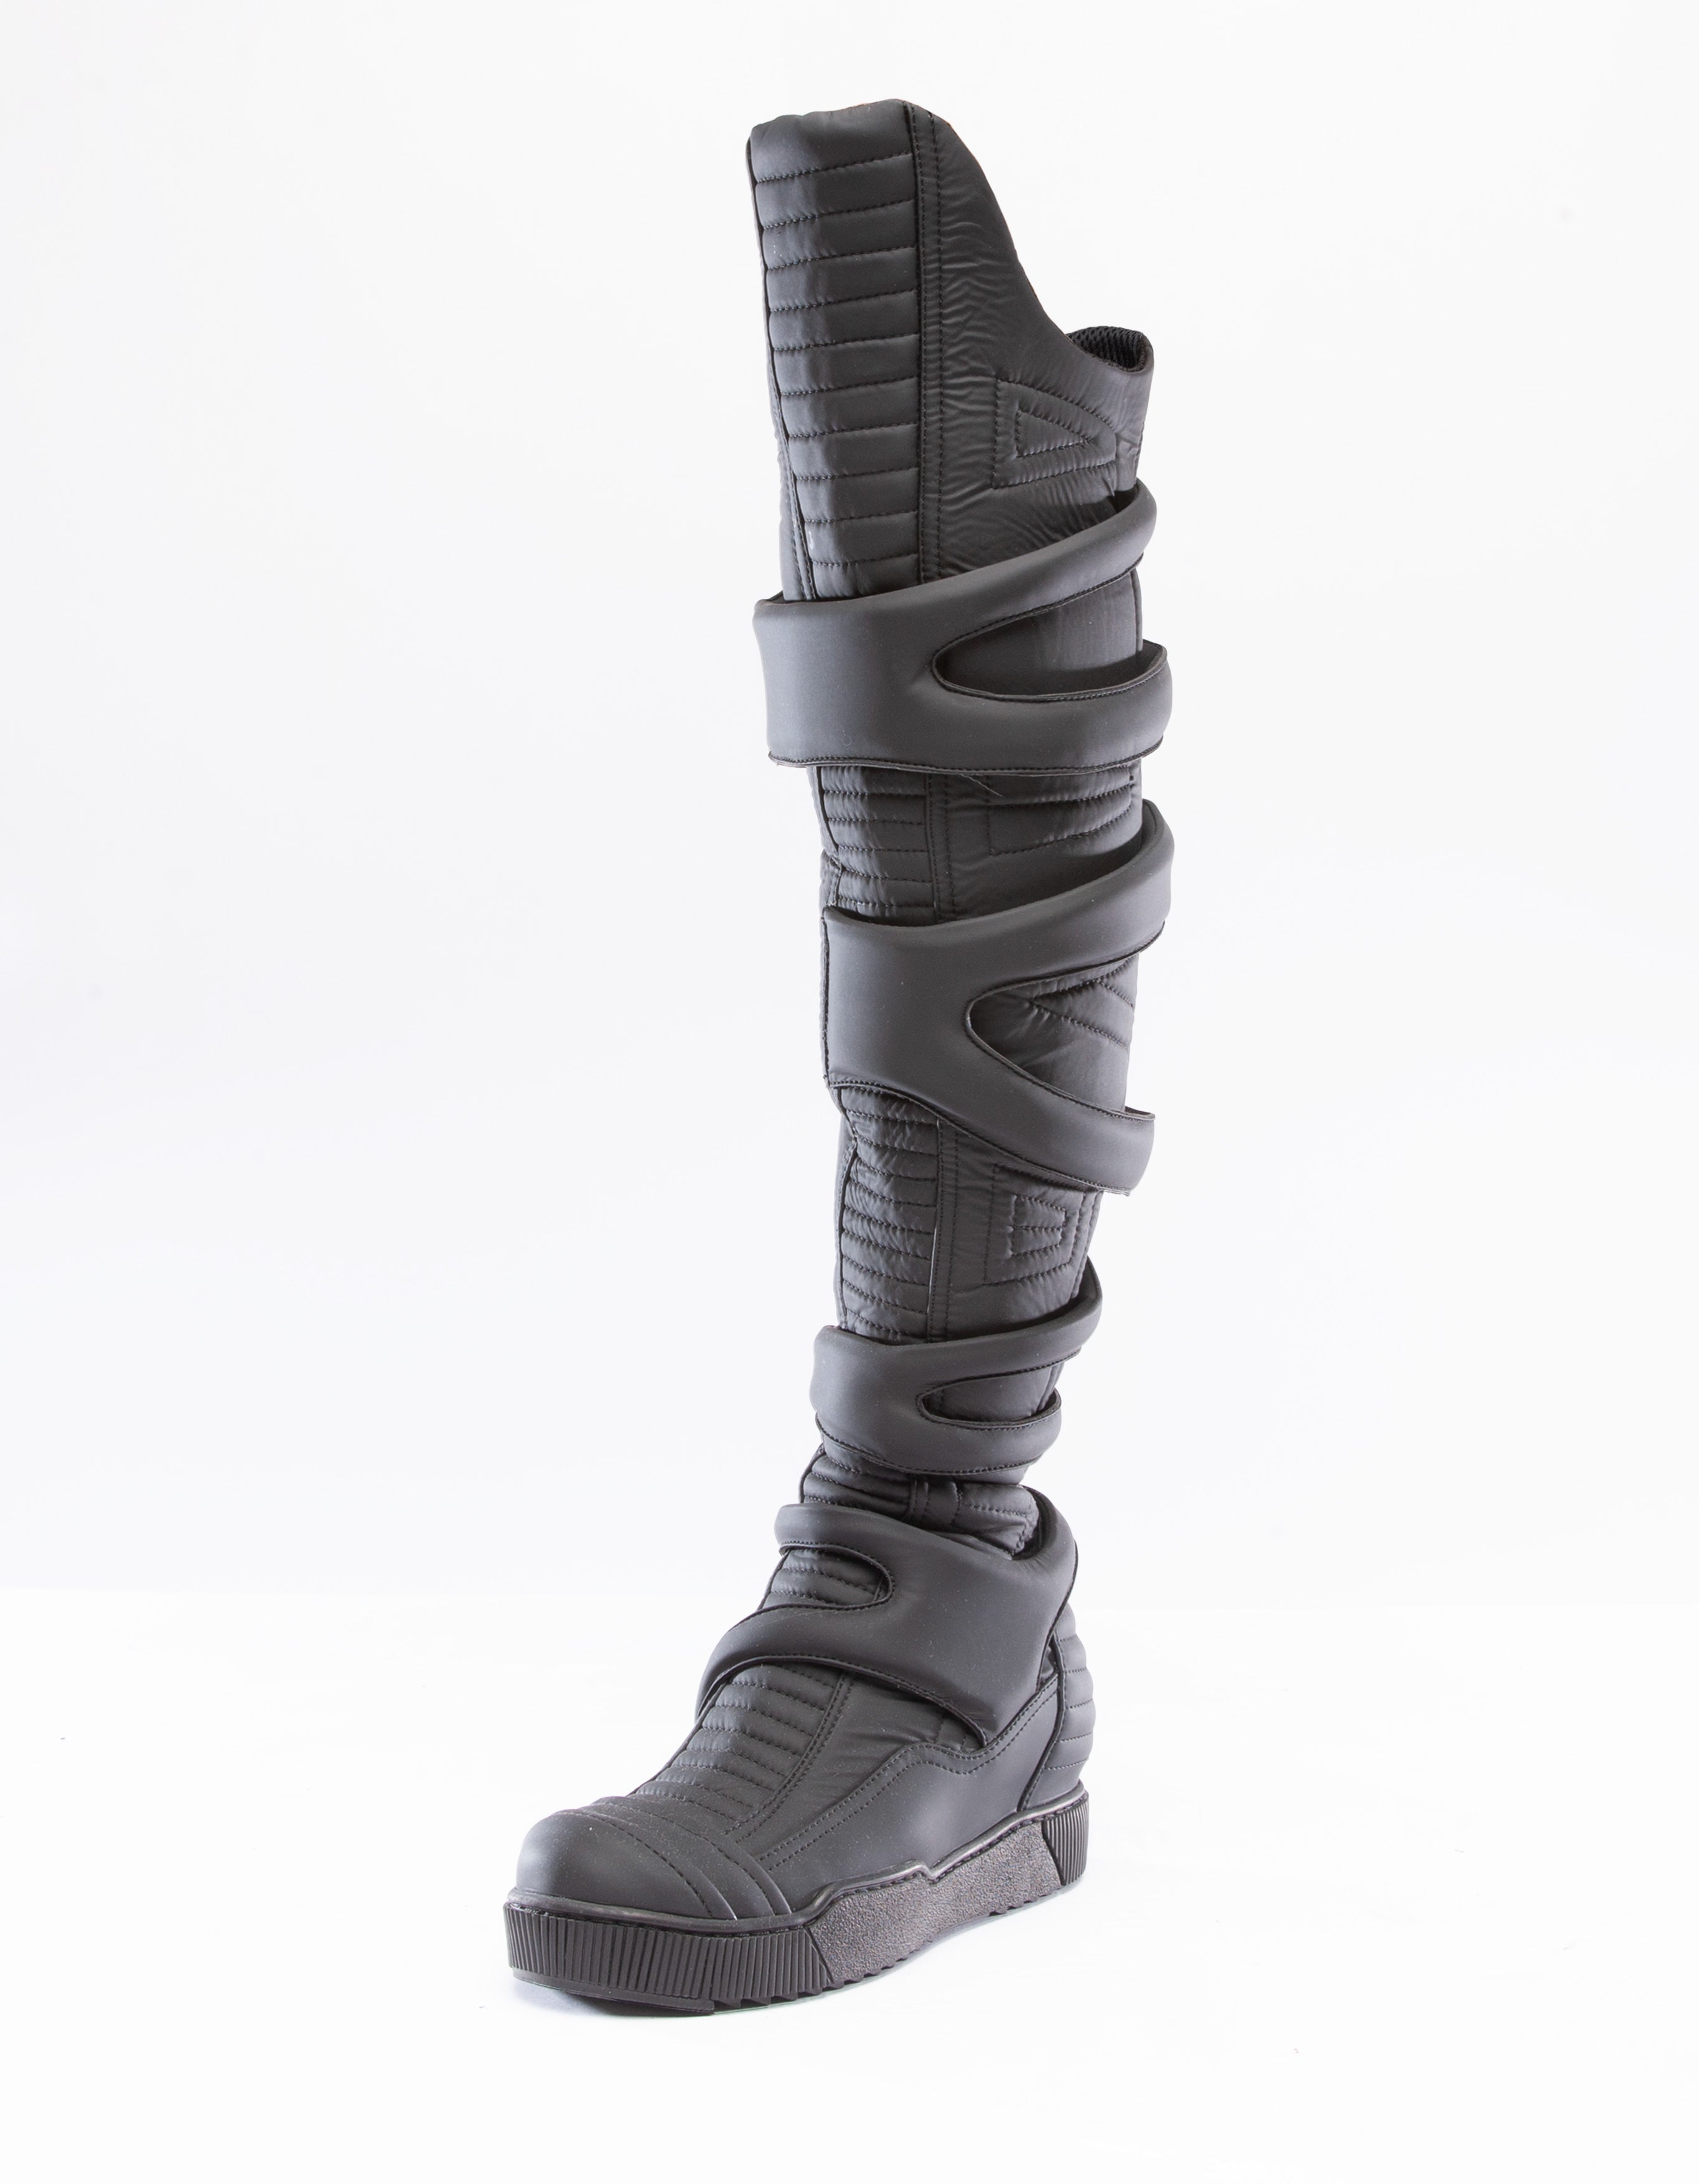 LONG BOOTS SOURCE